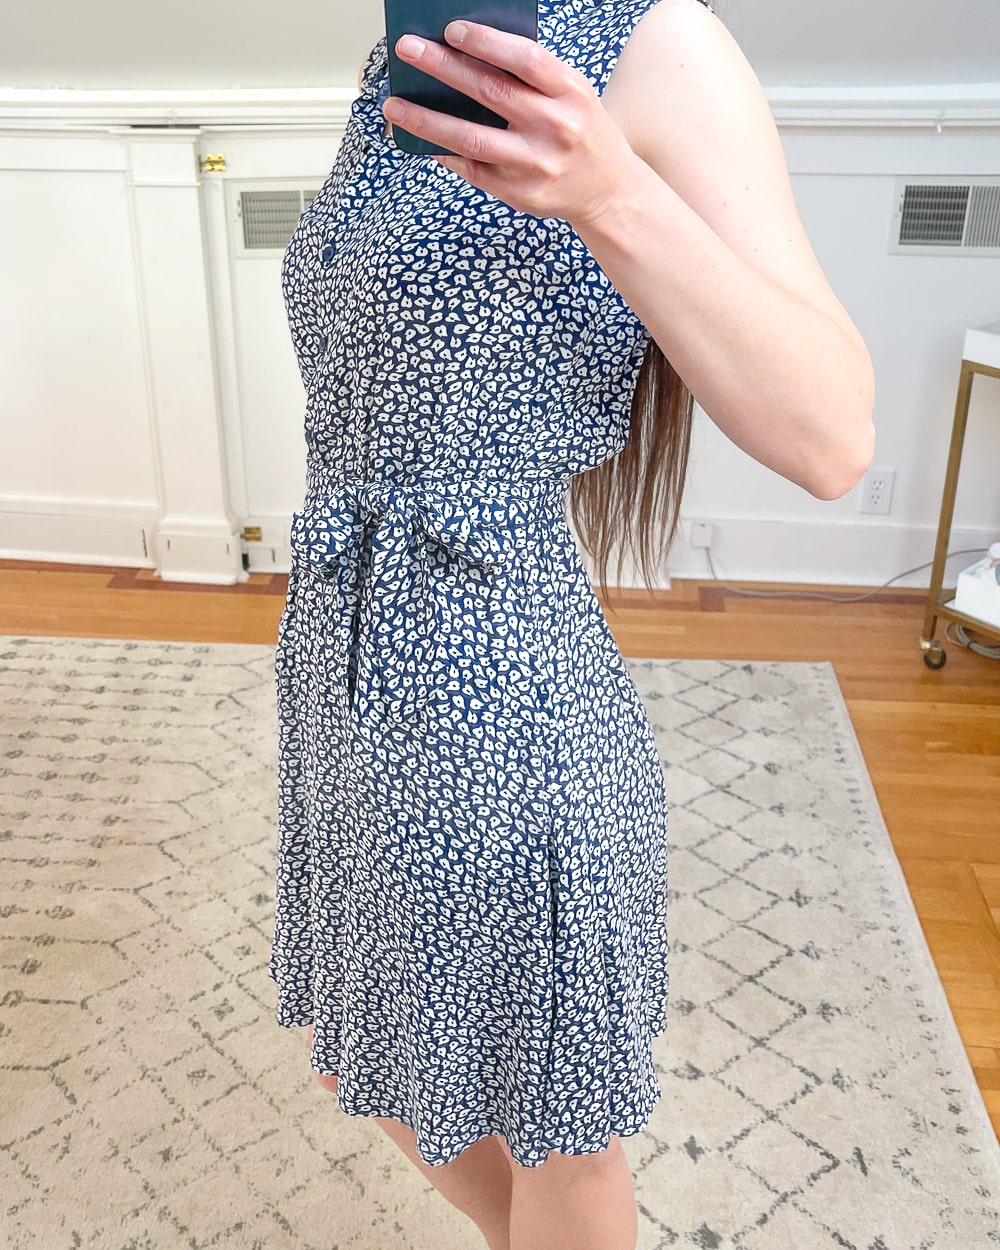 As part of her Amazon spring-try on haul, affordable fashion blogger Stephanie Ziajka shares a detail shot of her Amazon Essentials Women's Sleeveless Woven Shirt Dress in Navy White Pearls on Diary of a Debutante